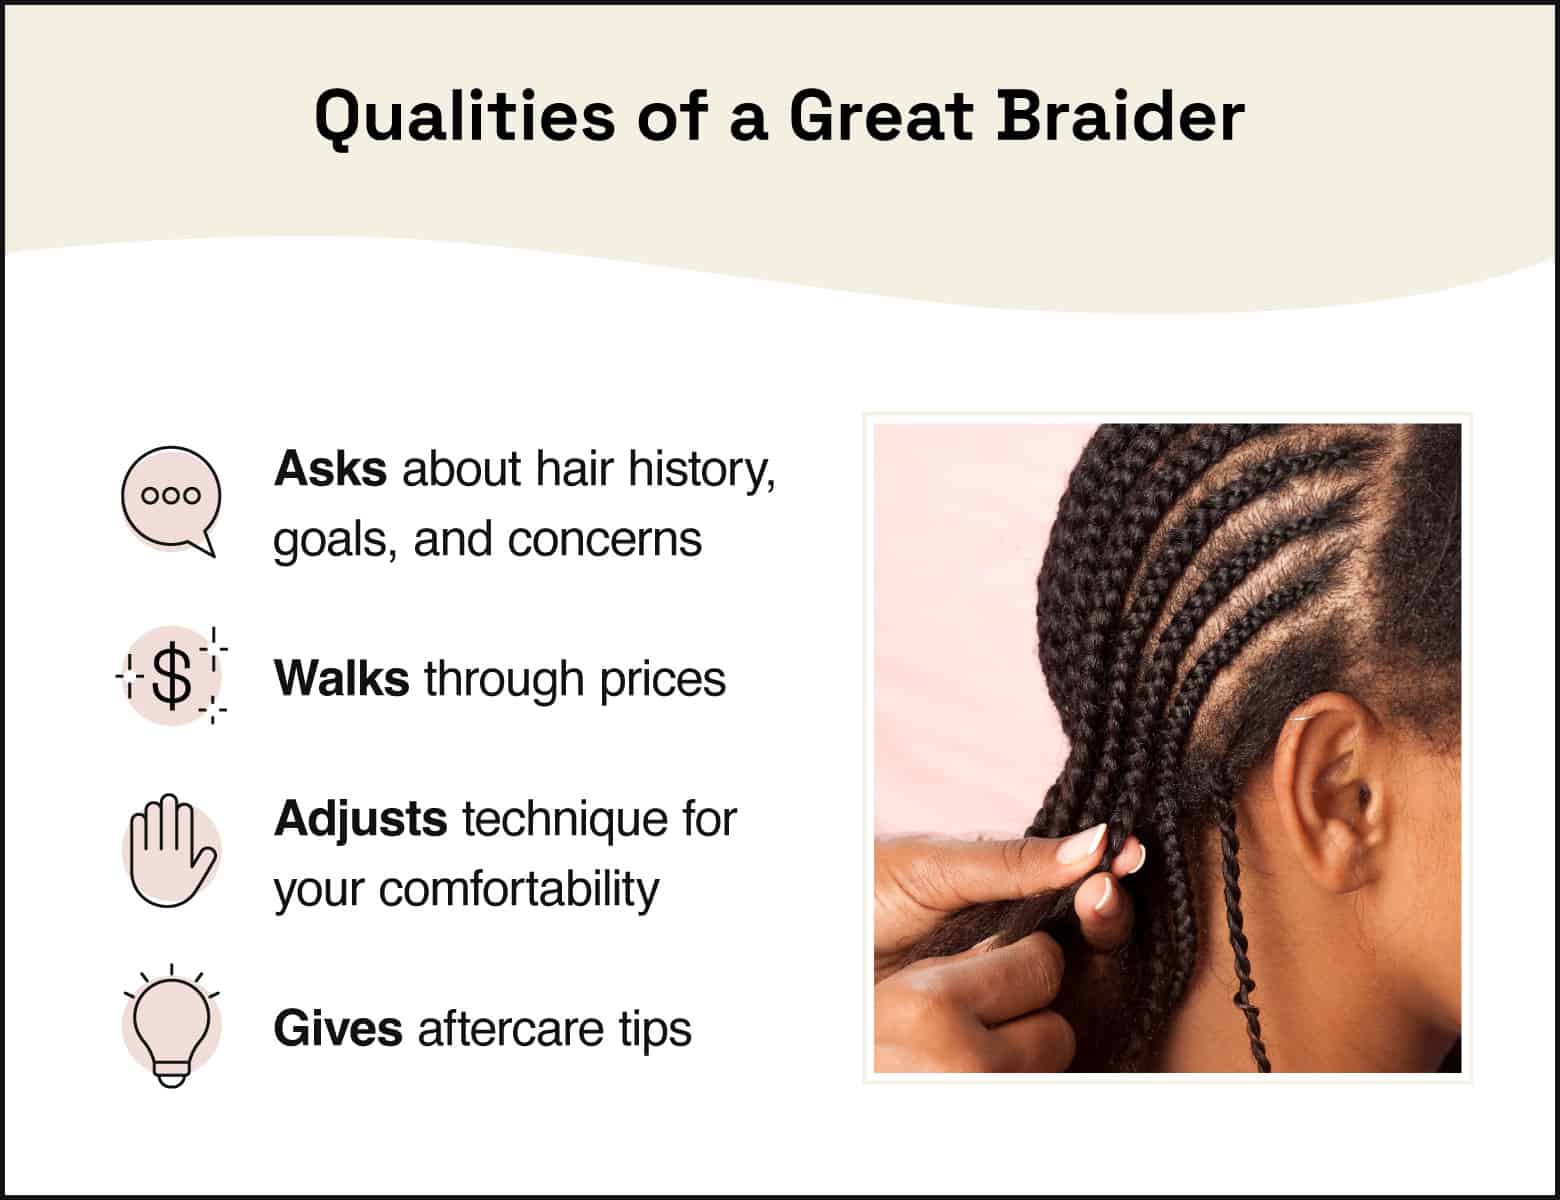 photo on the right showing cornrow process and text on the left summarizing qualities of a great braider